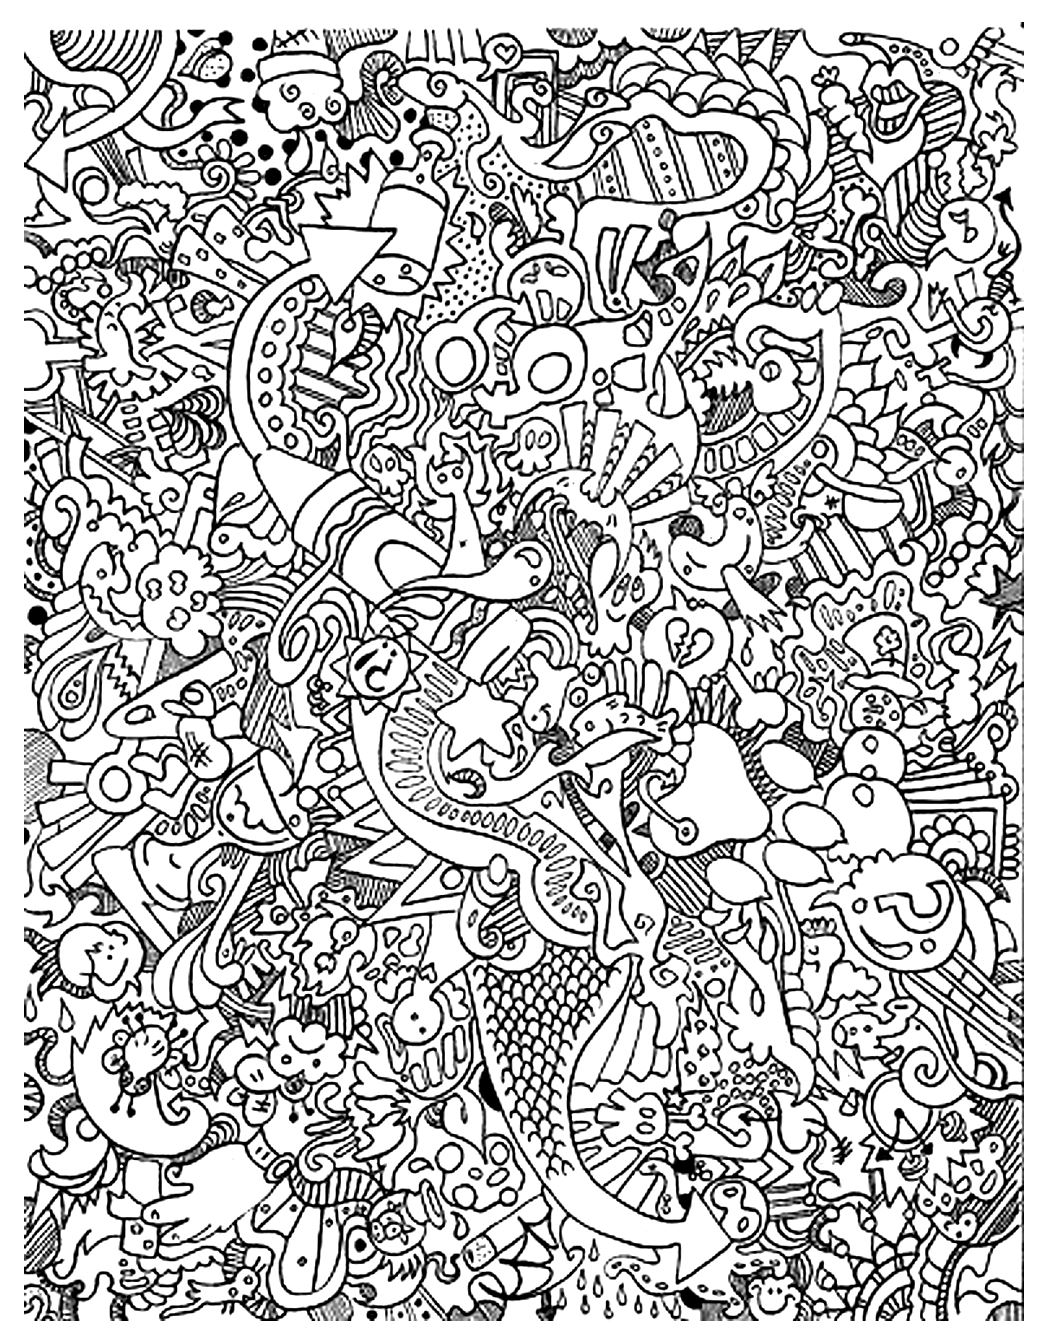 Download Big mess - Unclassifiable Adult Coloring Pages